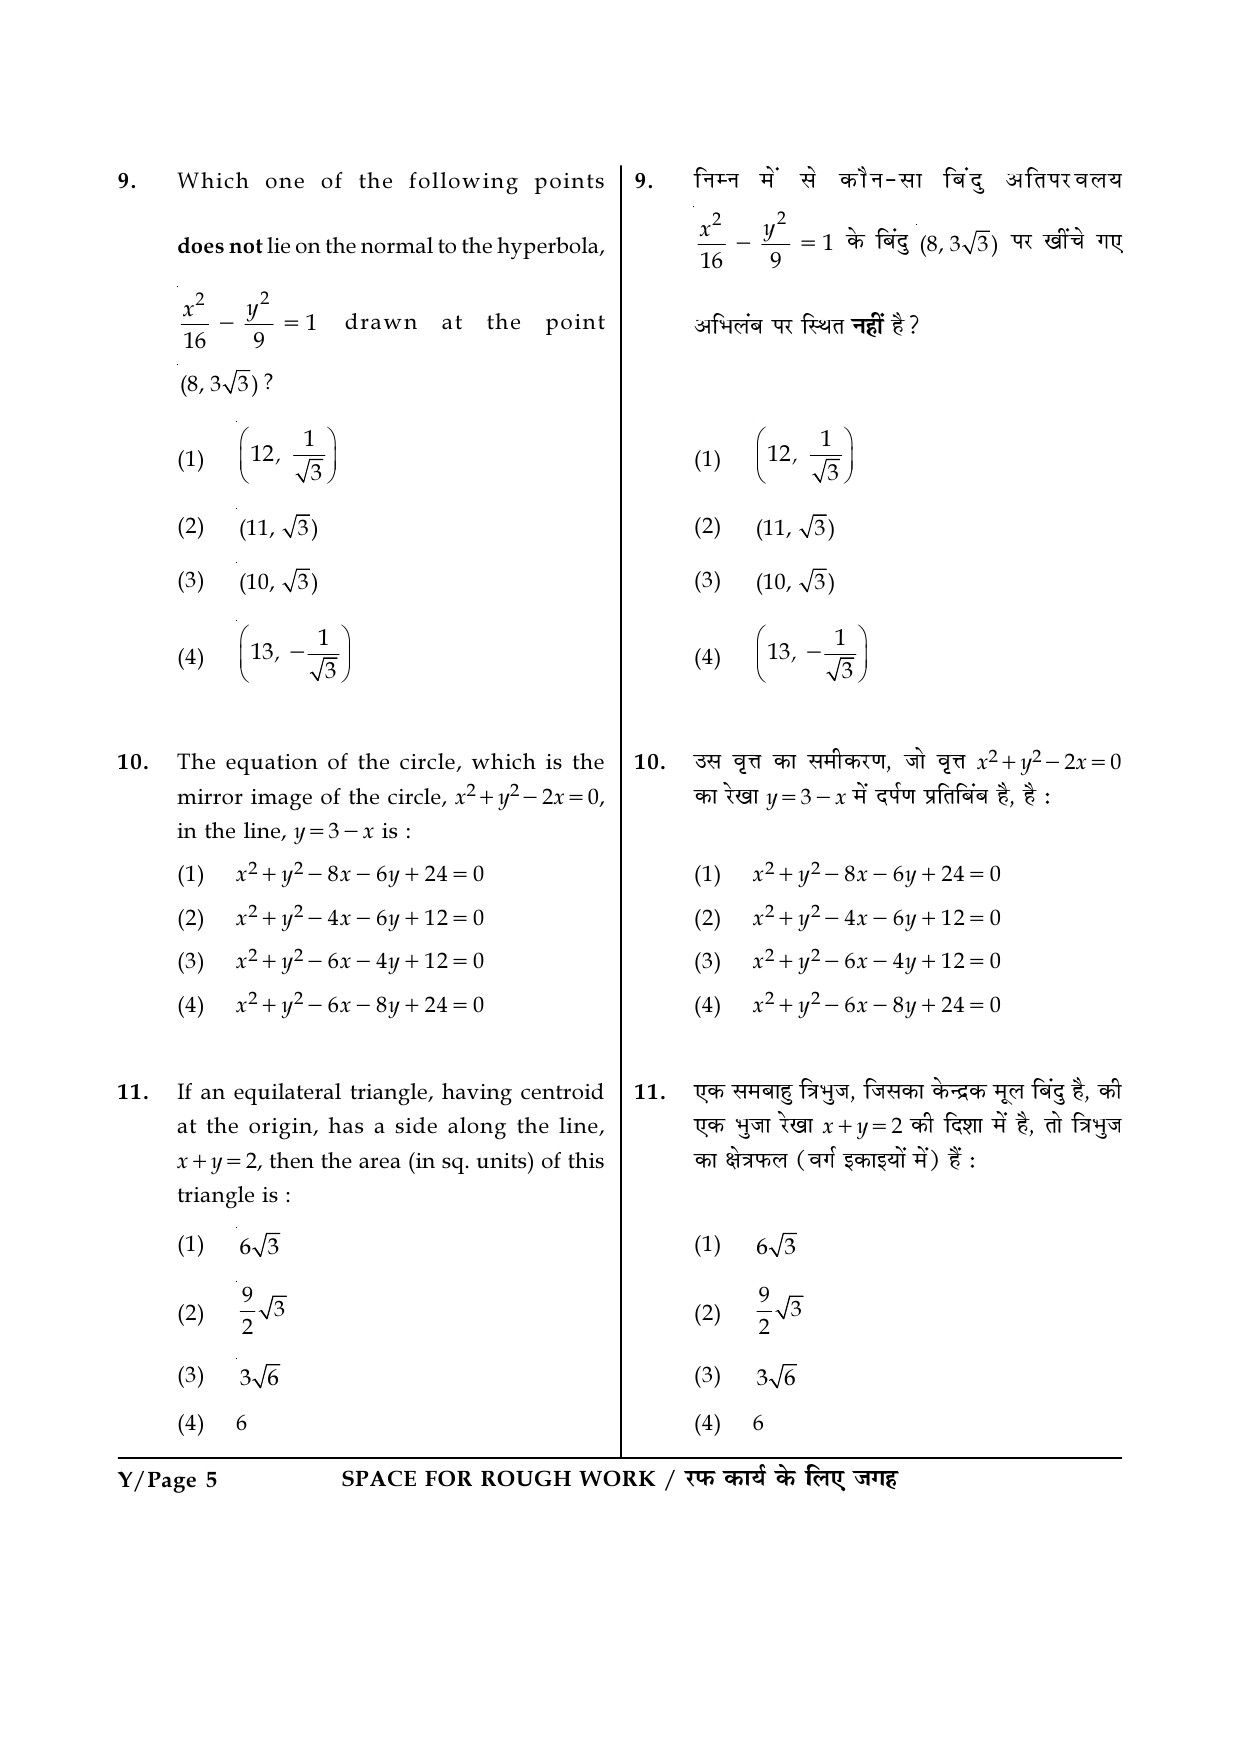 JEE Main Exam Question Paper 2017 Booklet Y 5